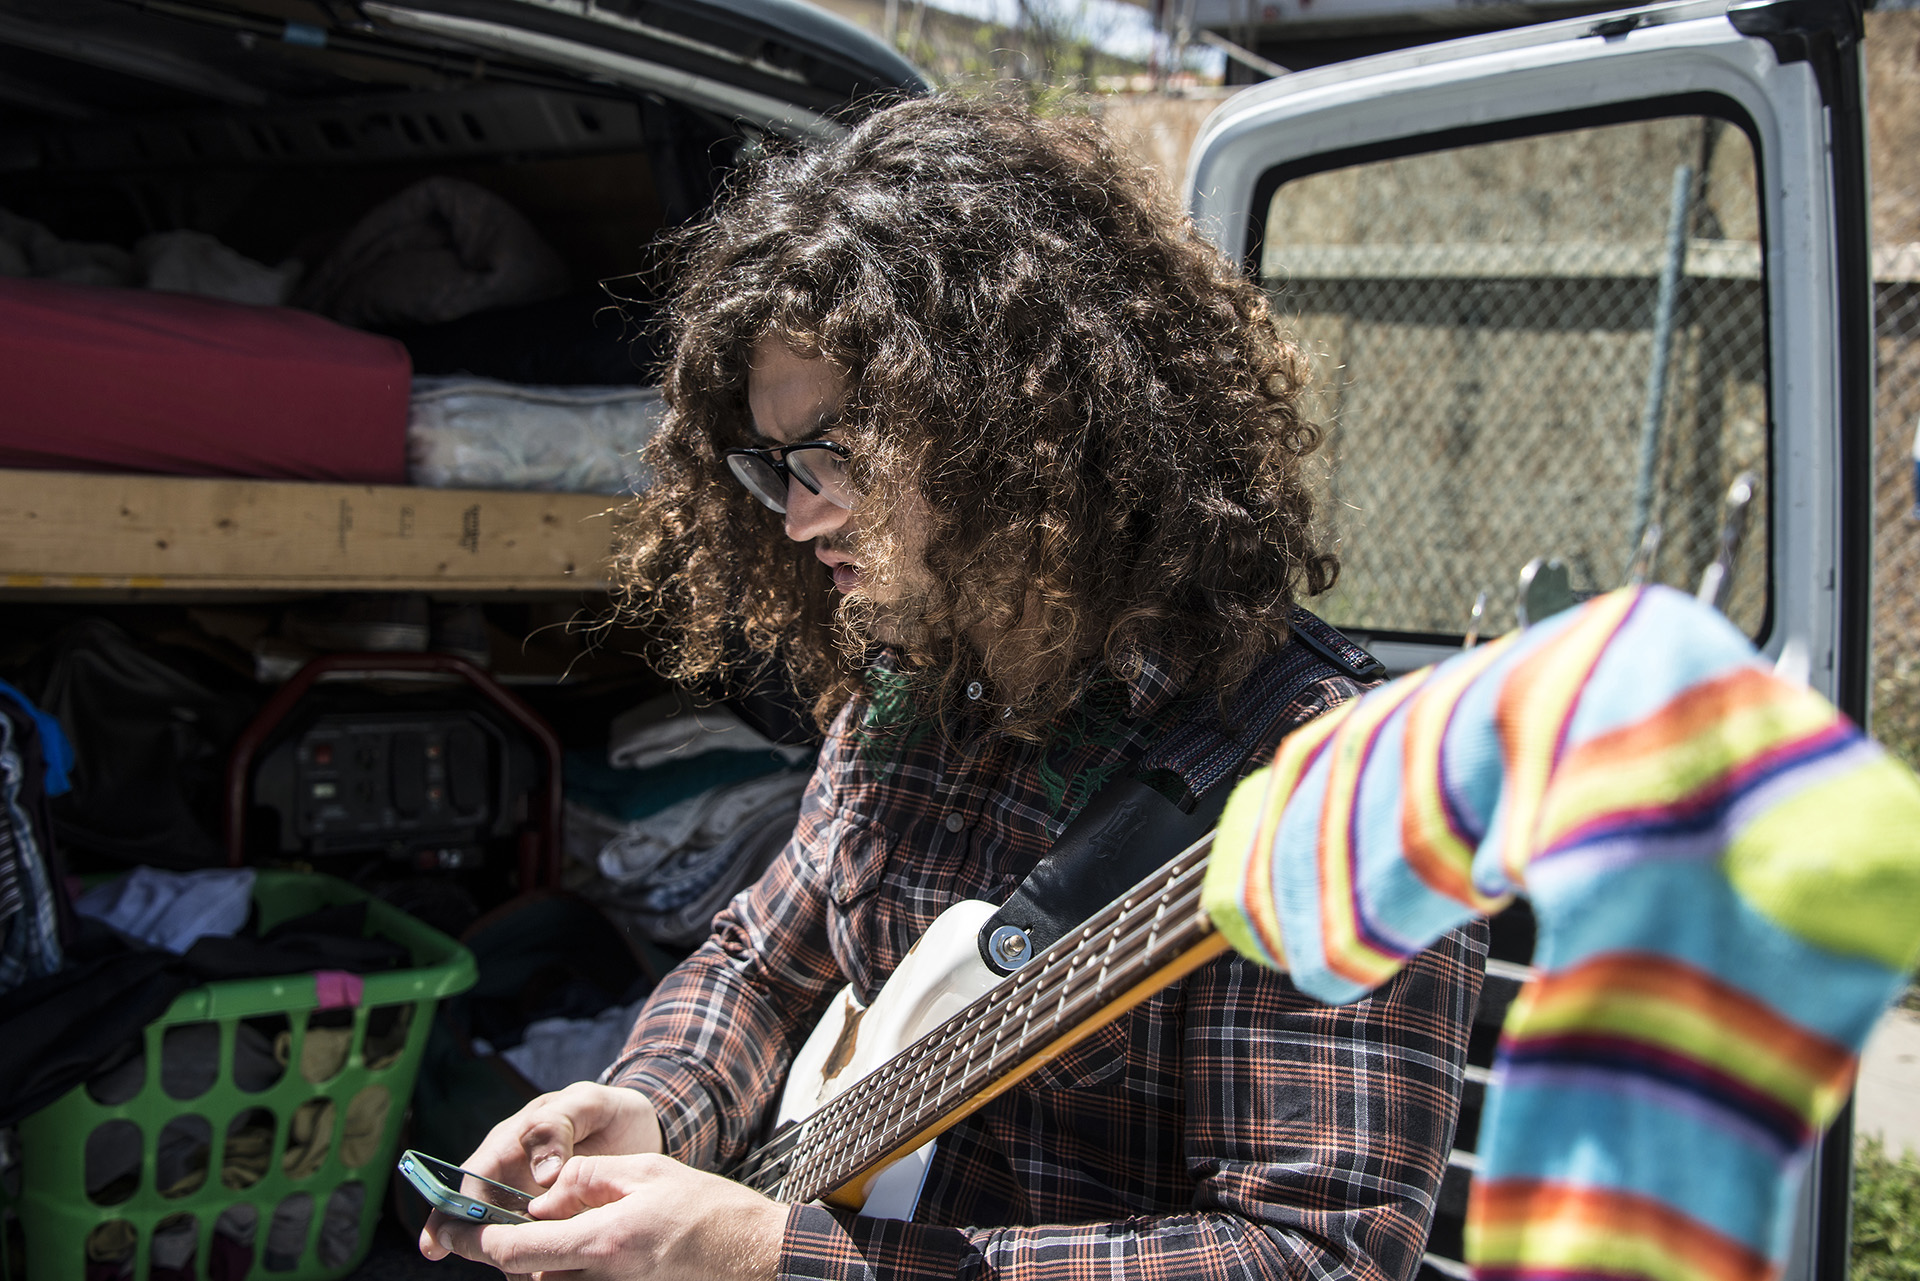 Collin Buntch, New Jersey: Homeless guy with guitar in L.A.